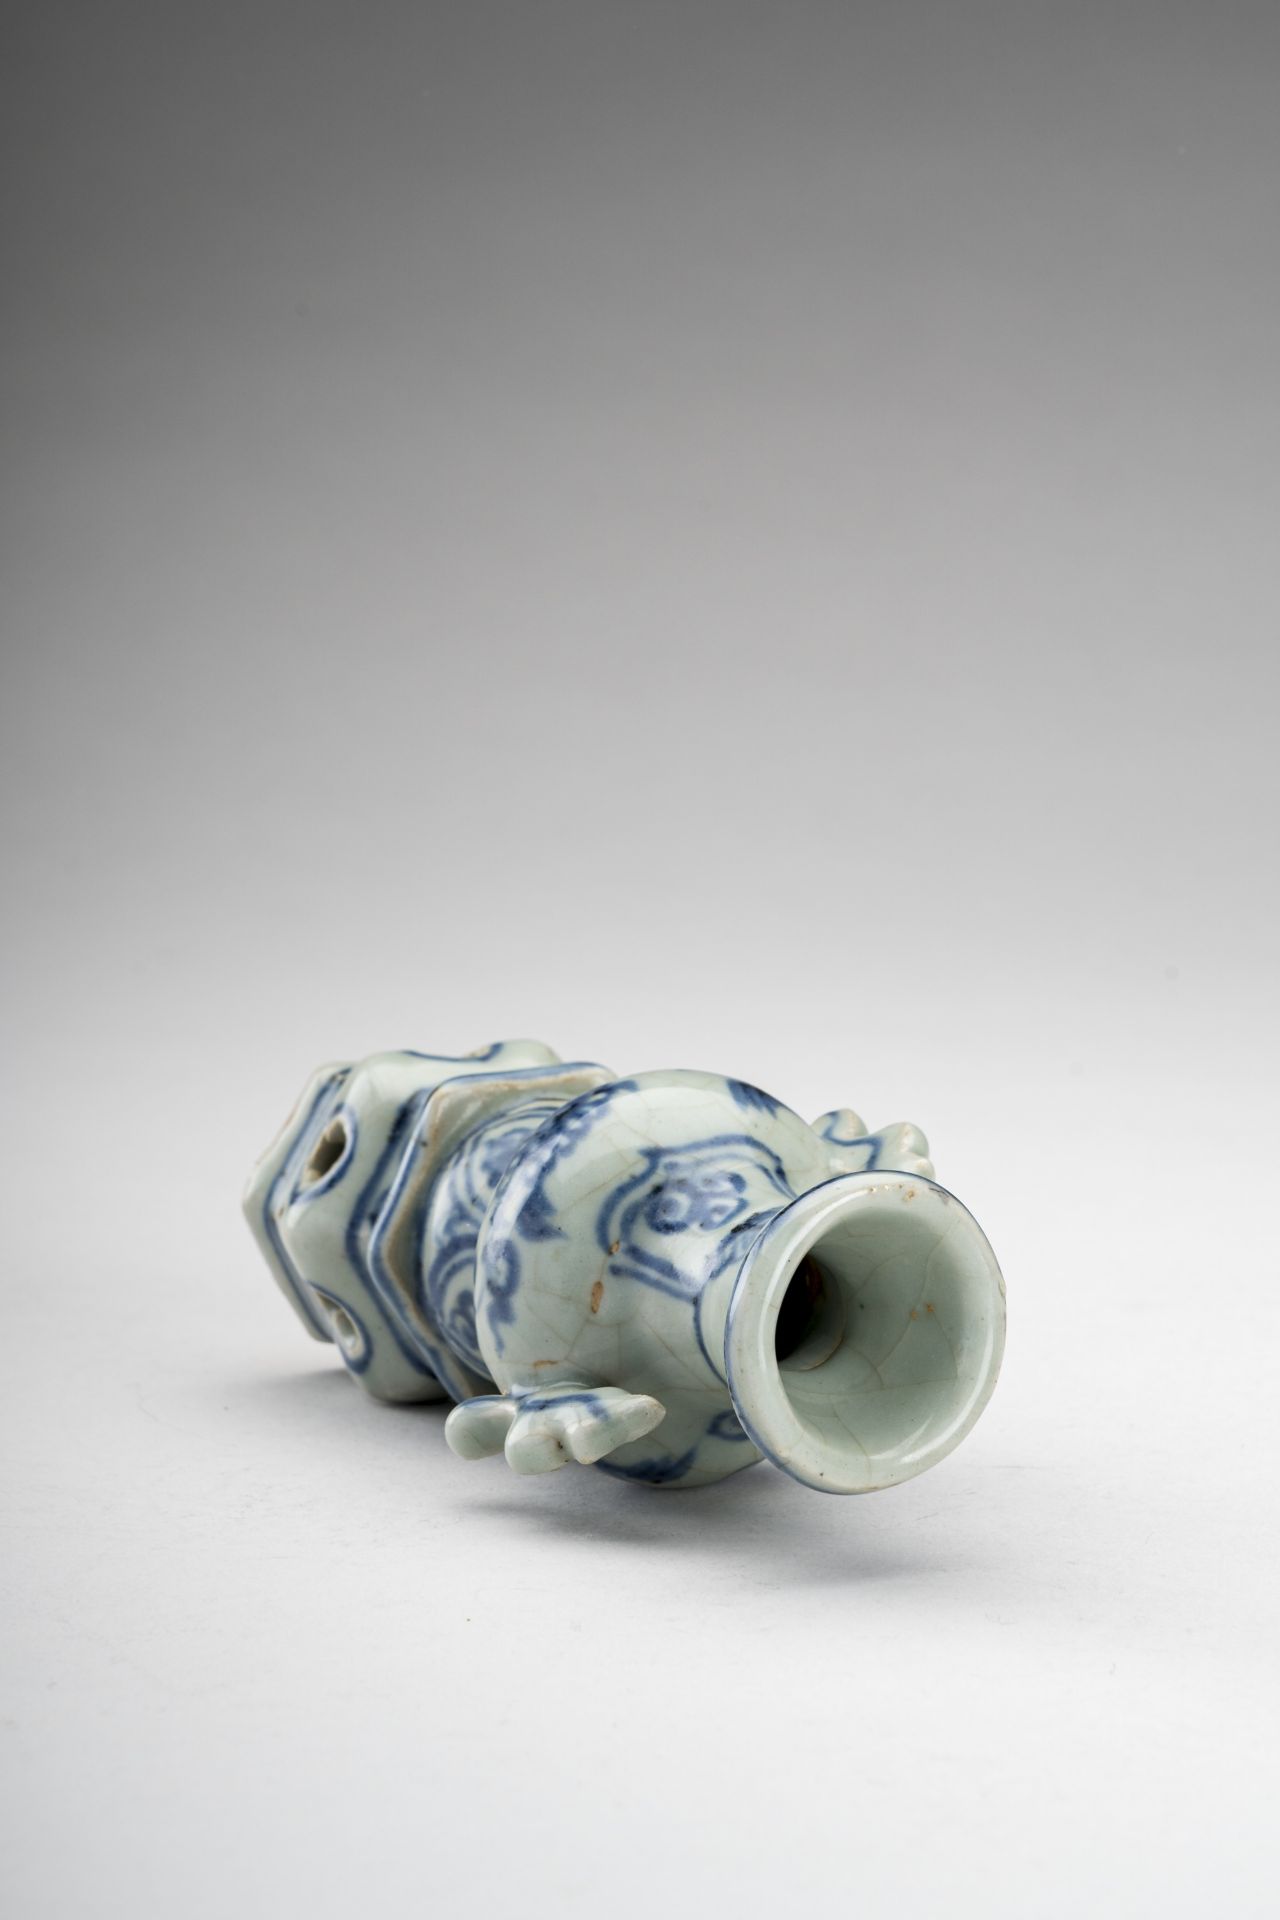 A SMALL BLUE AND WHITE PORCELAIN VASE - Image 6 of 7